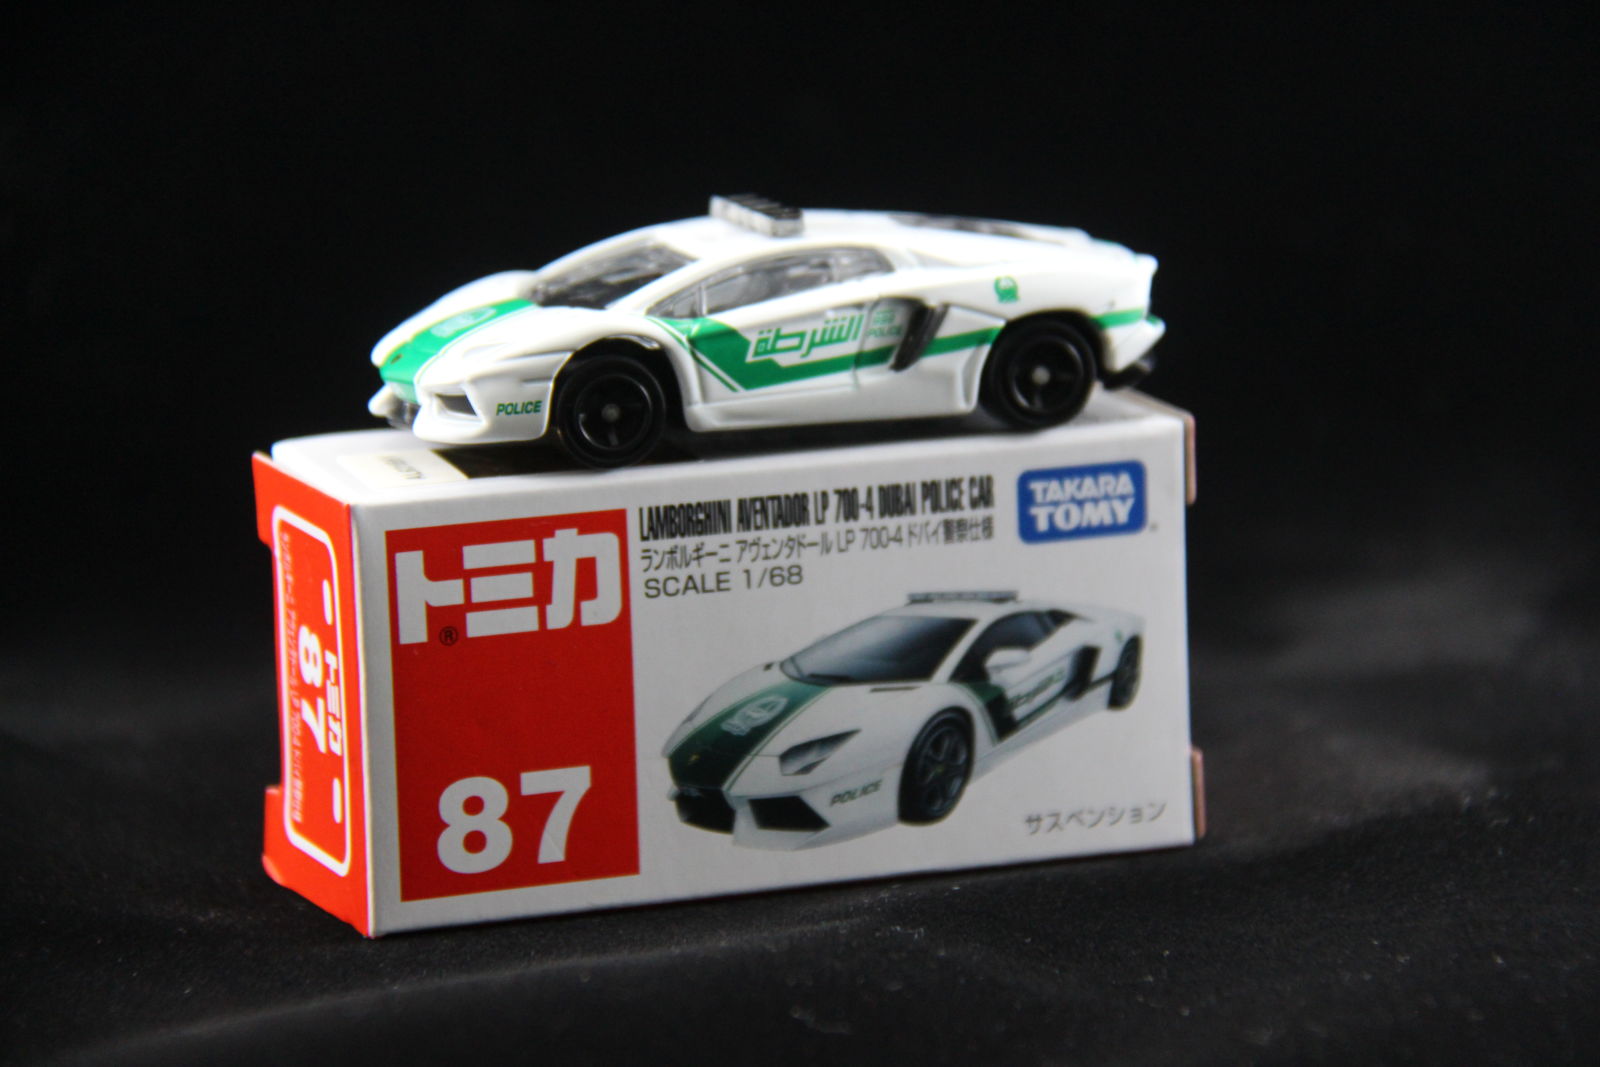 Then she flatly said, “You need a Lamborghini police car.” Well, I already have MBX’s Gallardo, but this is far more awesome for sure!